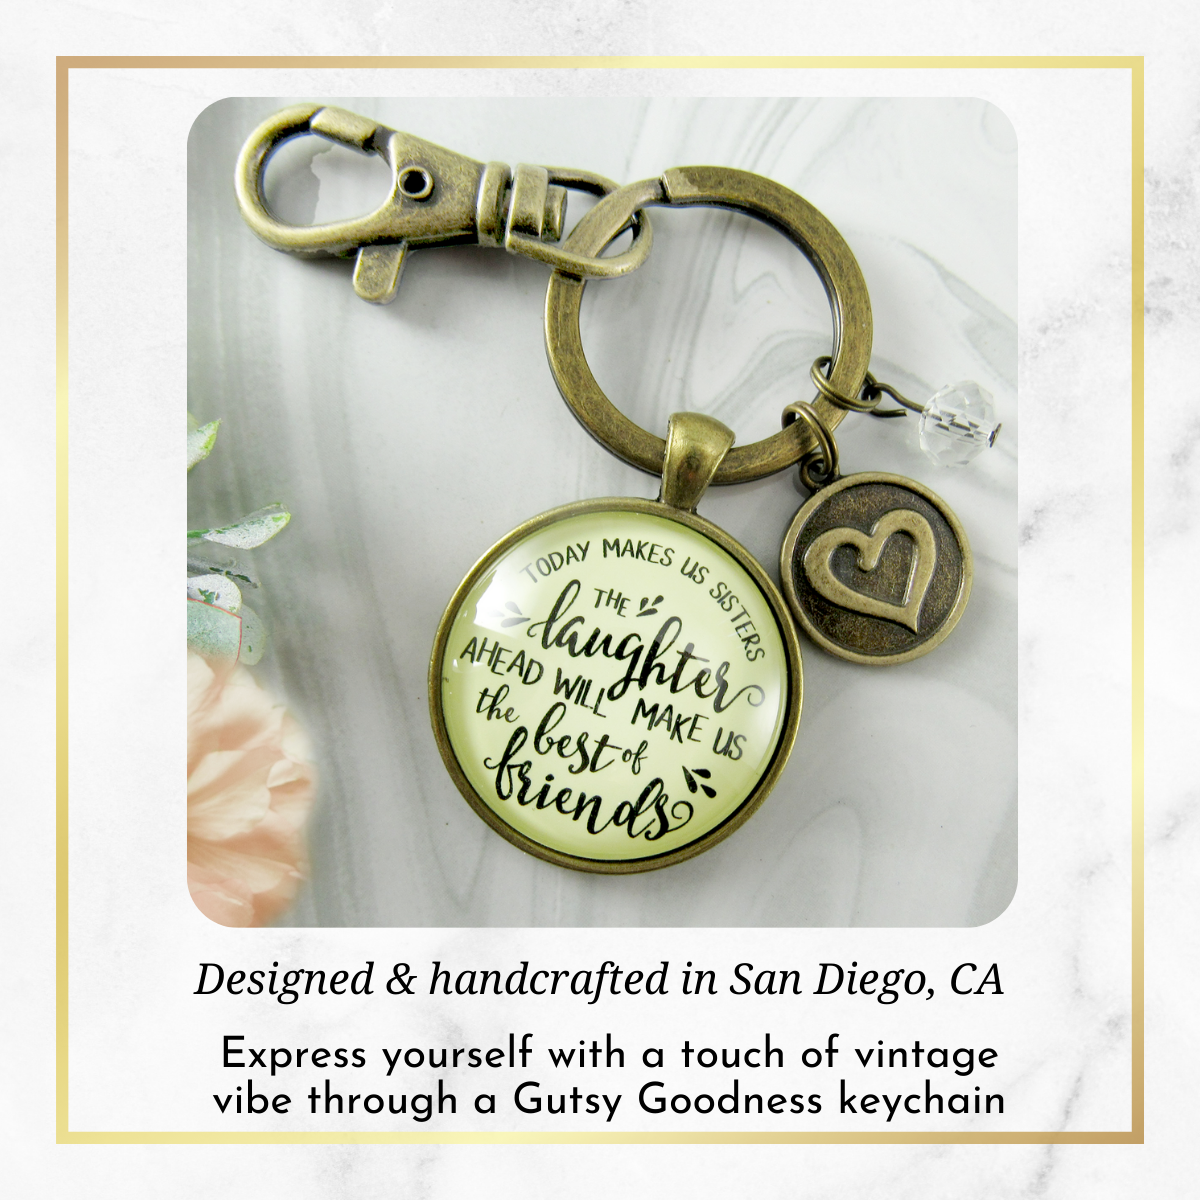 Sister In Law Keychain Today Makes Us Sisters Laughter Best Friends Wedding Day Jewelry Gift - Gutsy Goodness Handmade Jewelry;Sister In Law Keychain Today Makes Us Sisters Laughter Best Friends Wedding Day Jewelry Gift - Gutsy Goodness Handmade Jewelry Gifts